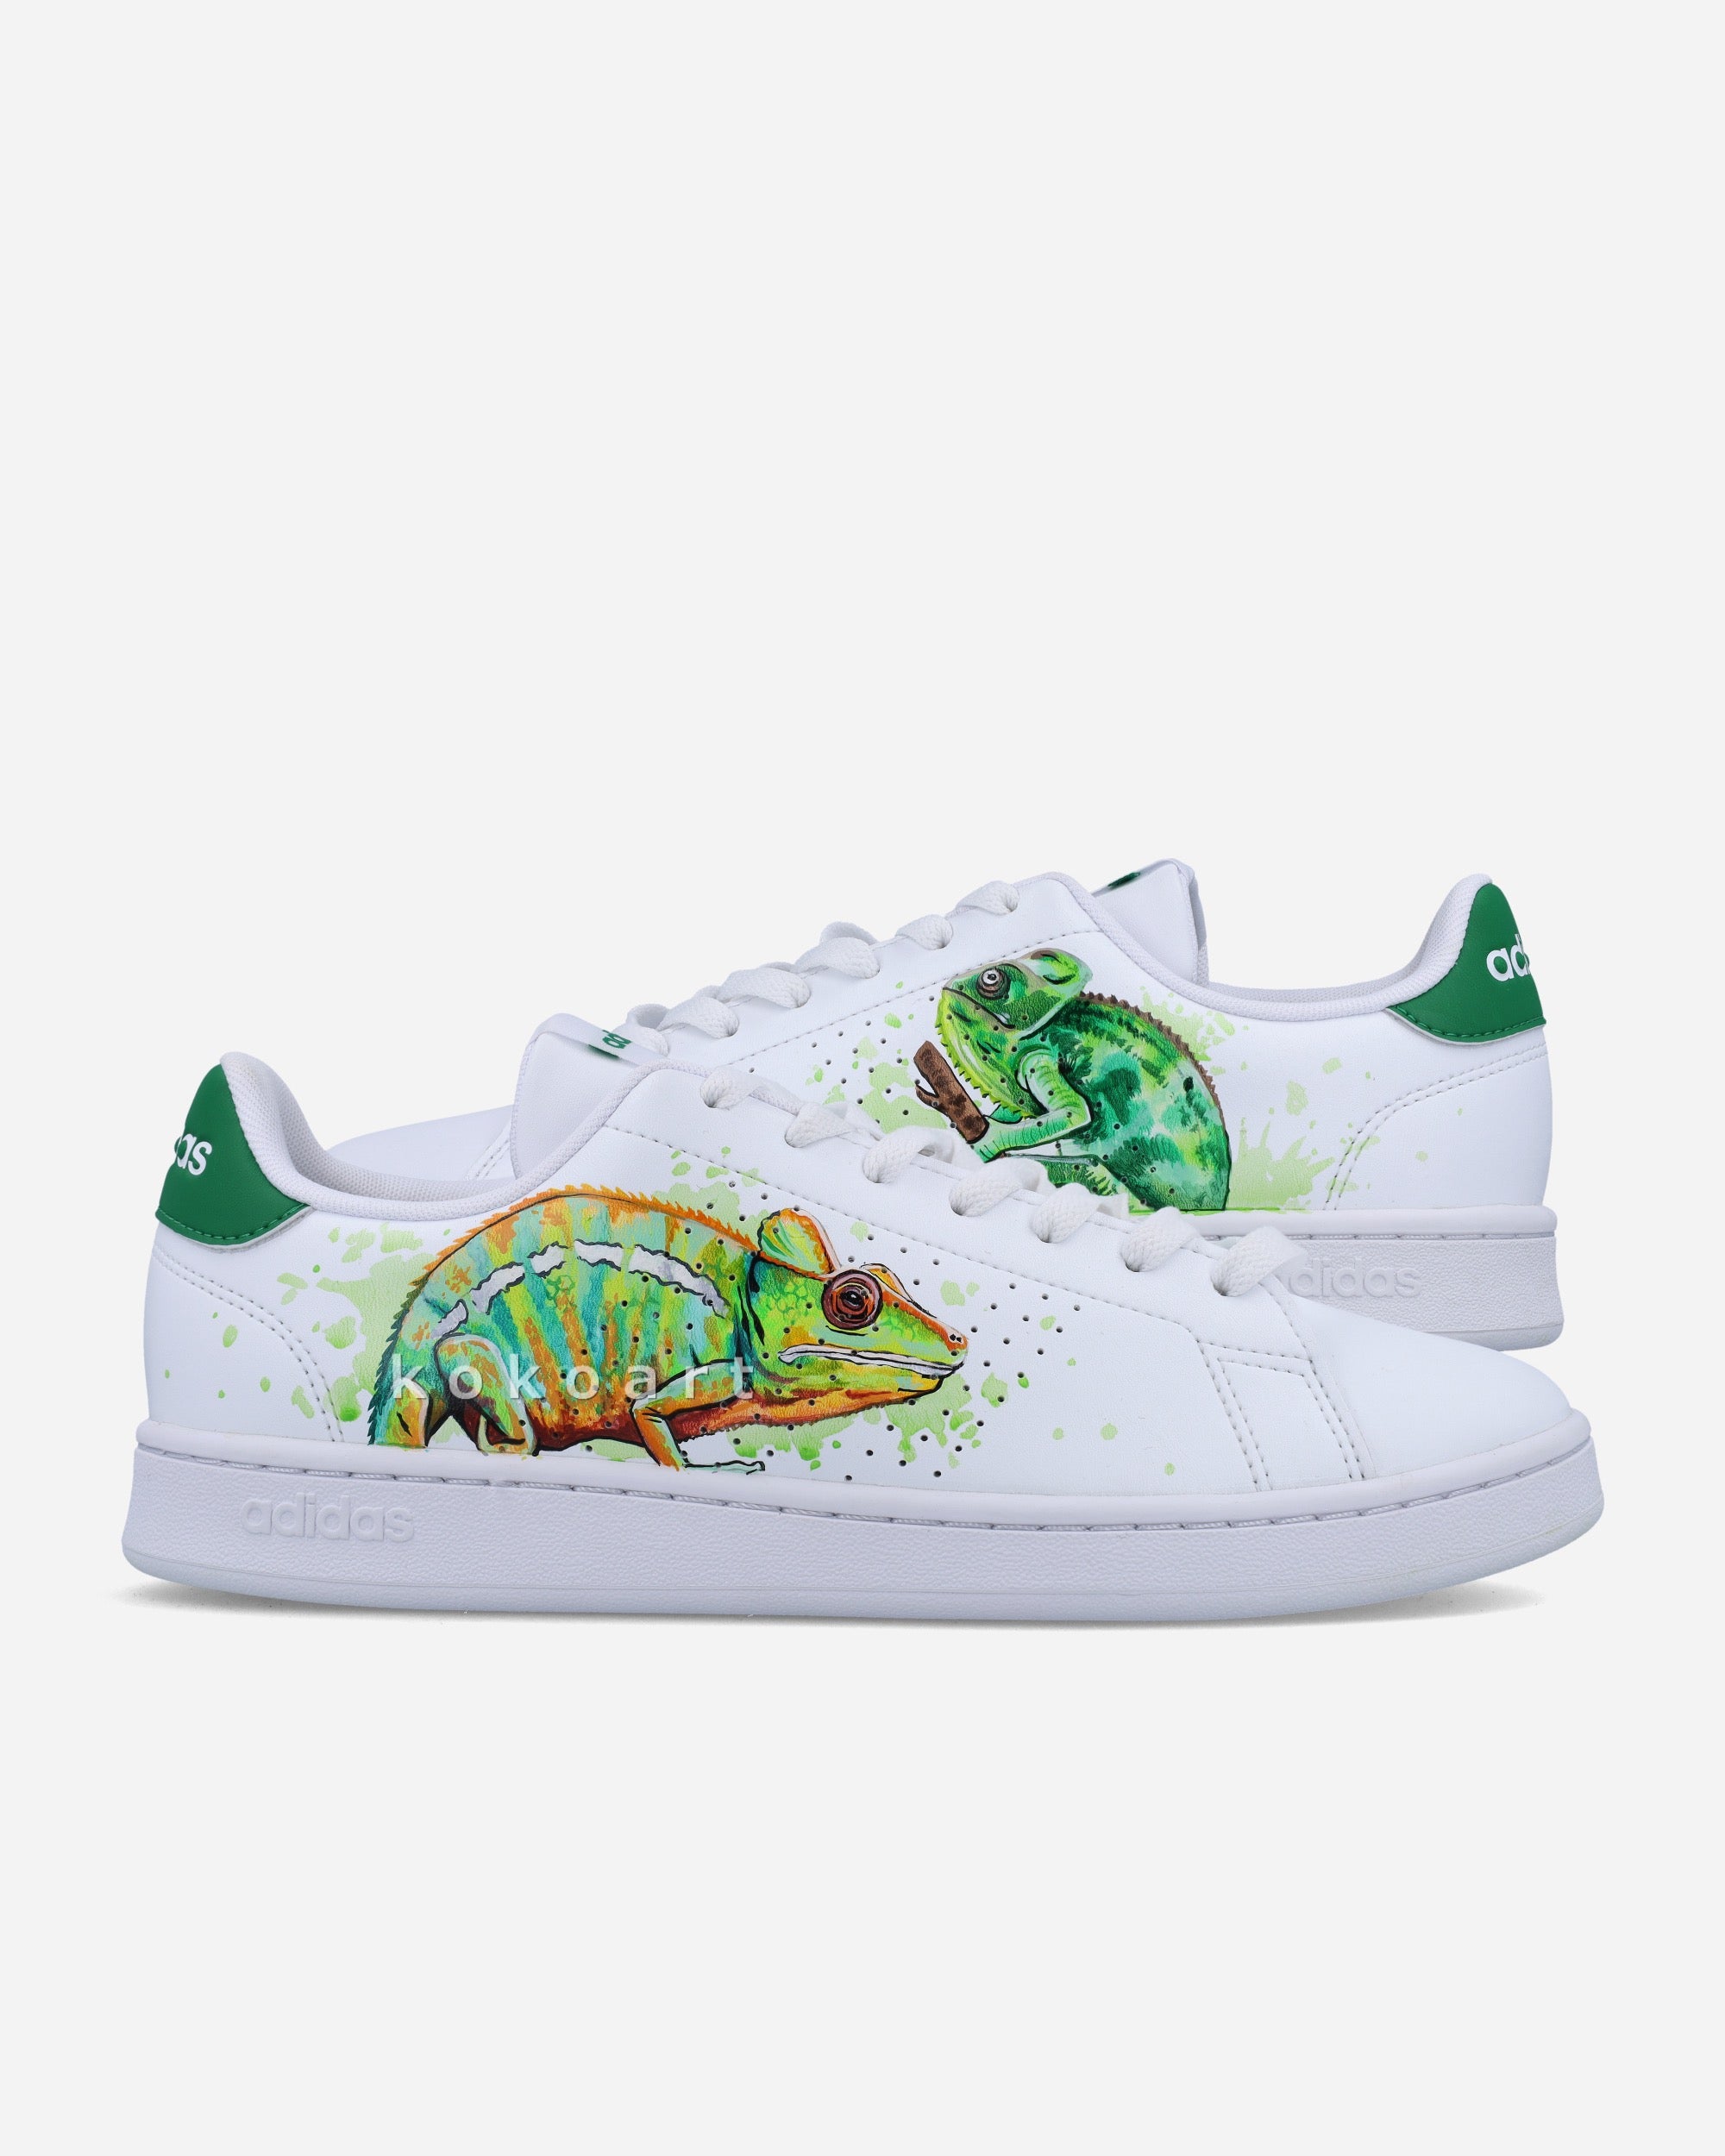 Adidas Hand Painted Chameleons with Watercolour Background